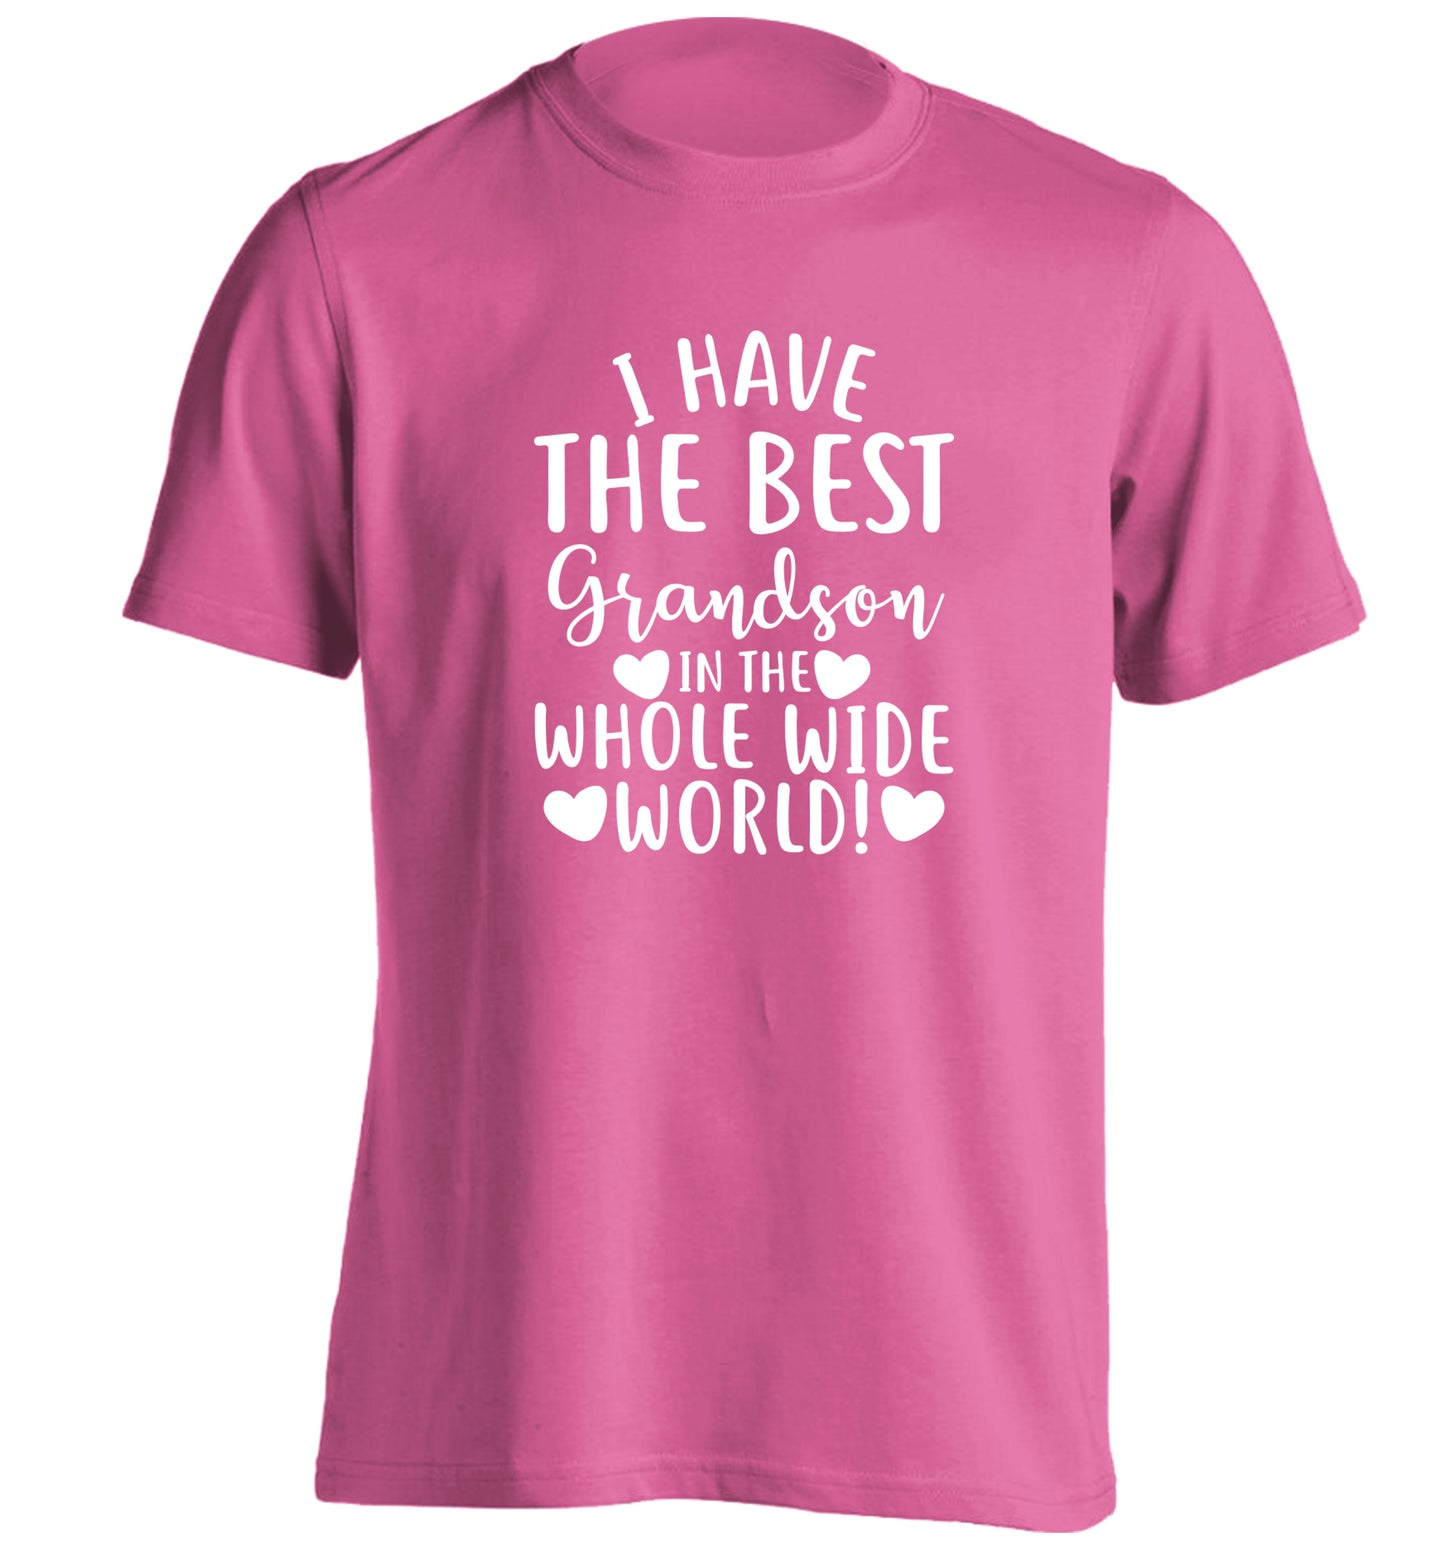 I have the best grandson in the whole wide world! adults unisex pink Tshirt 2XL